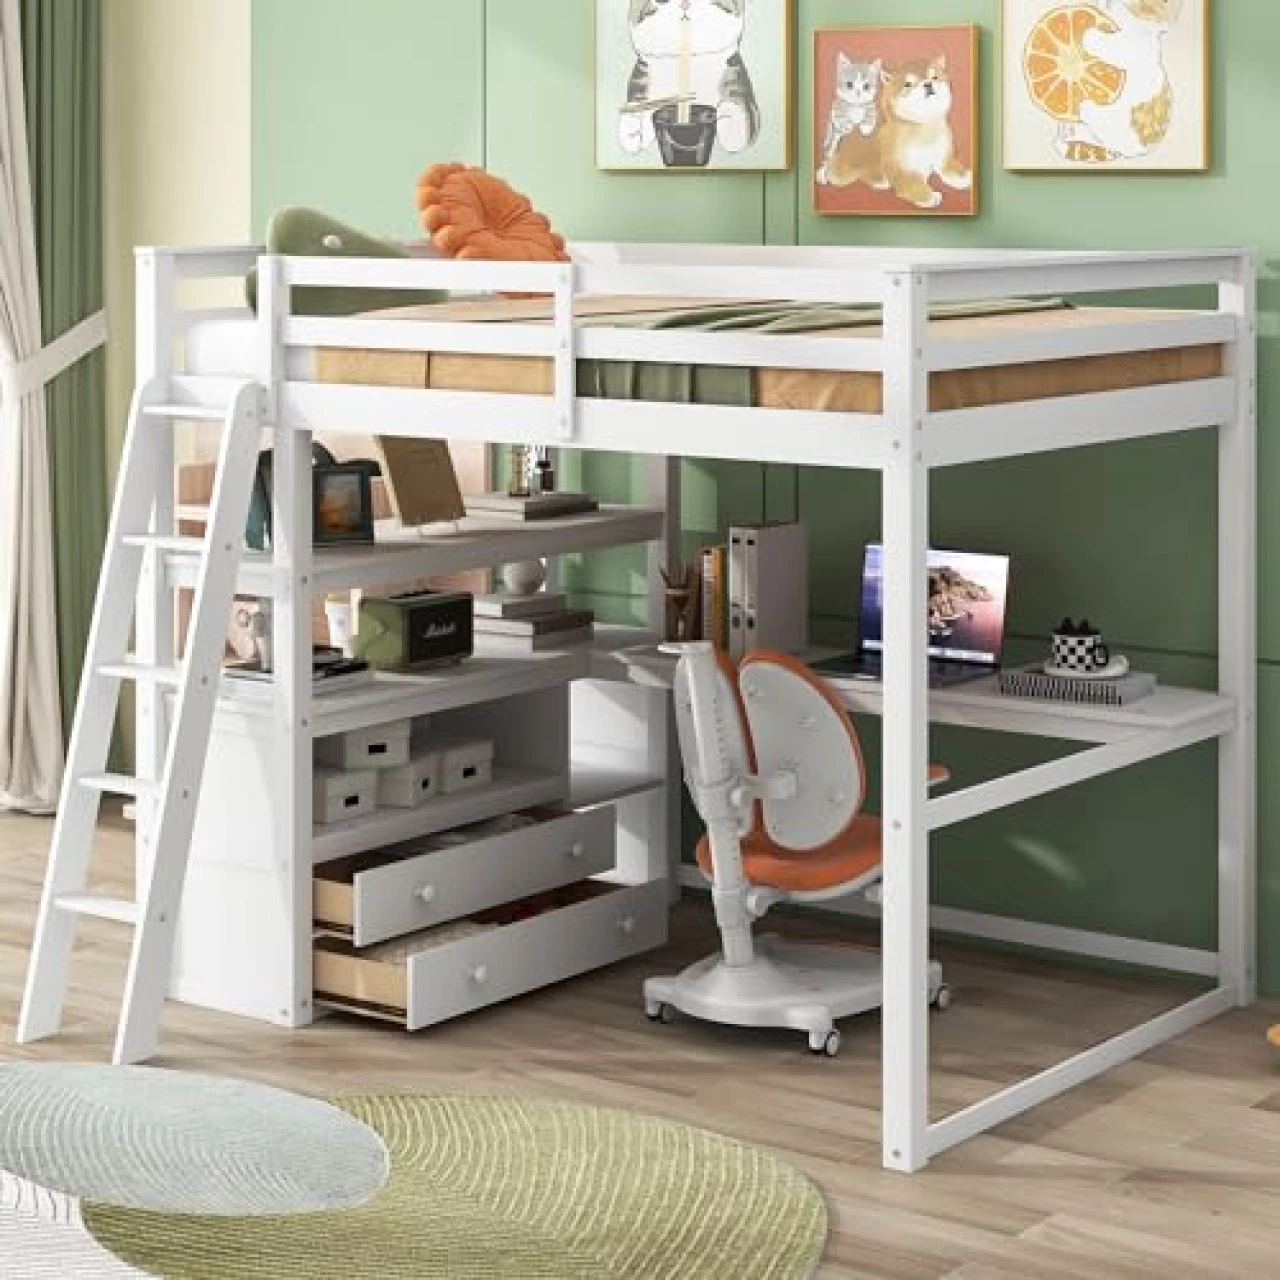 BIADNBZ Full Size Loft Bed with Desk, Drawers, Shelves, Wooden High Loftbed, White